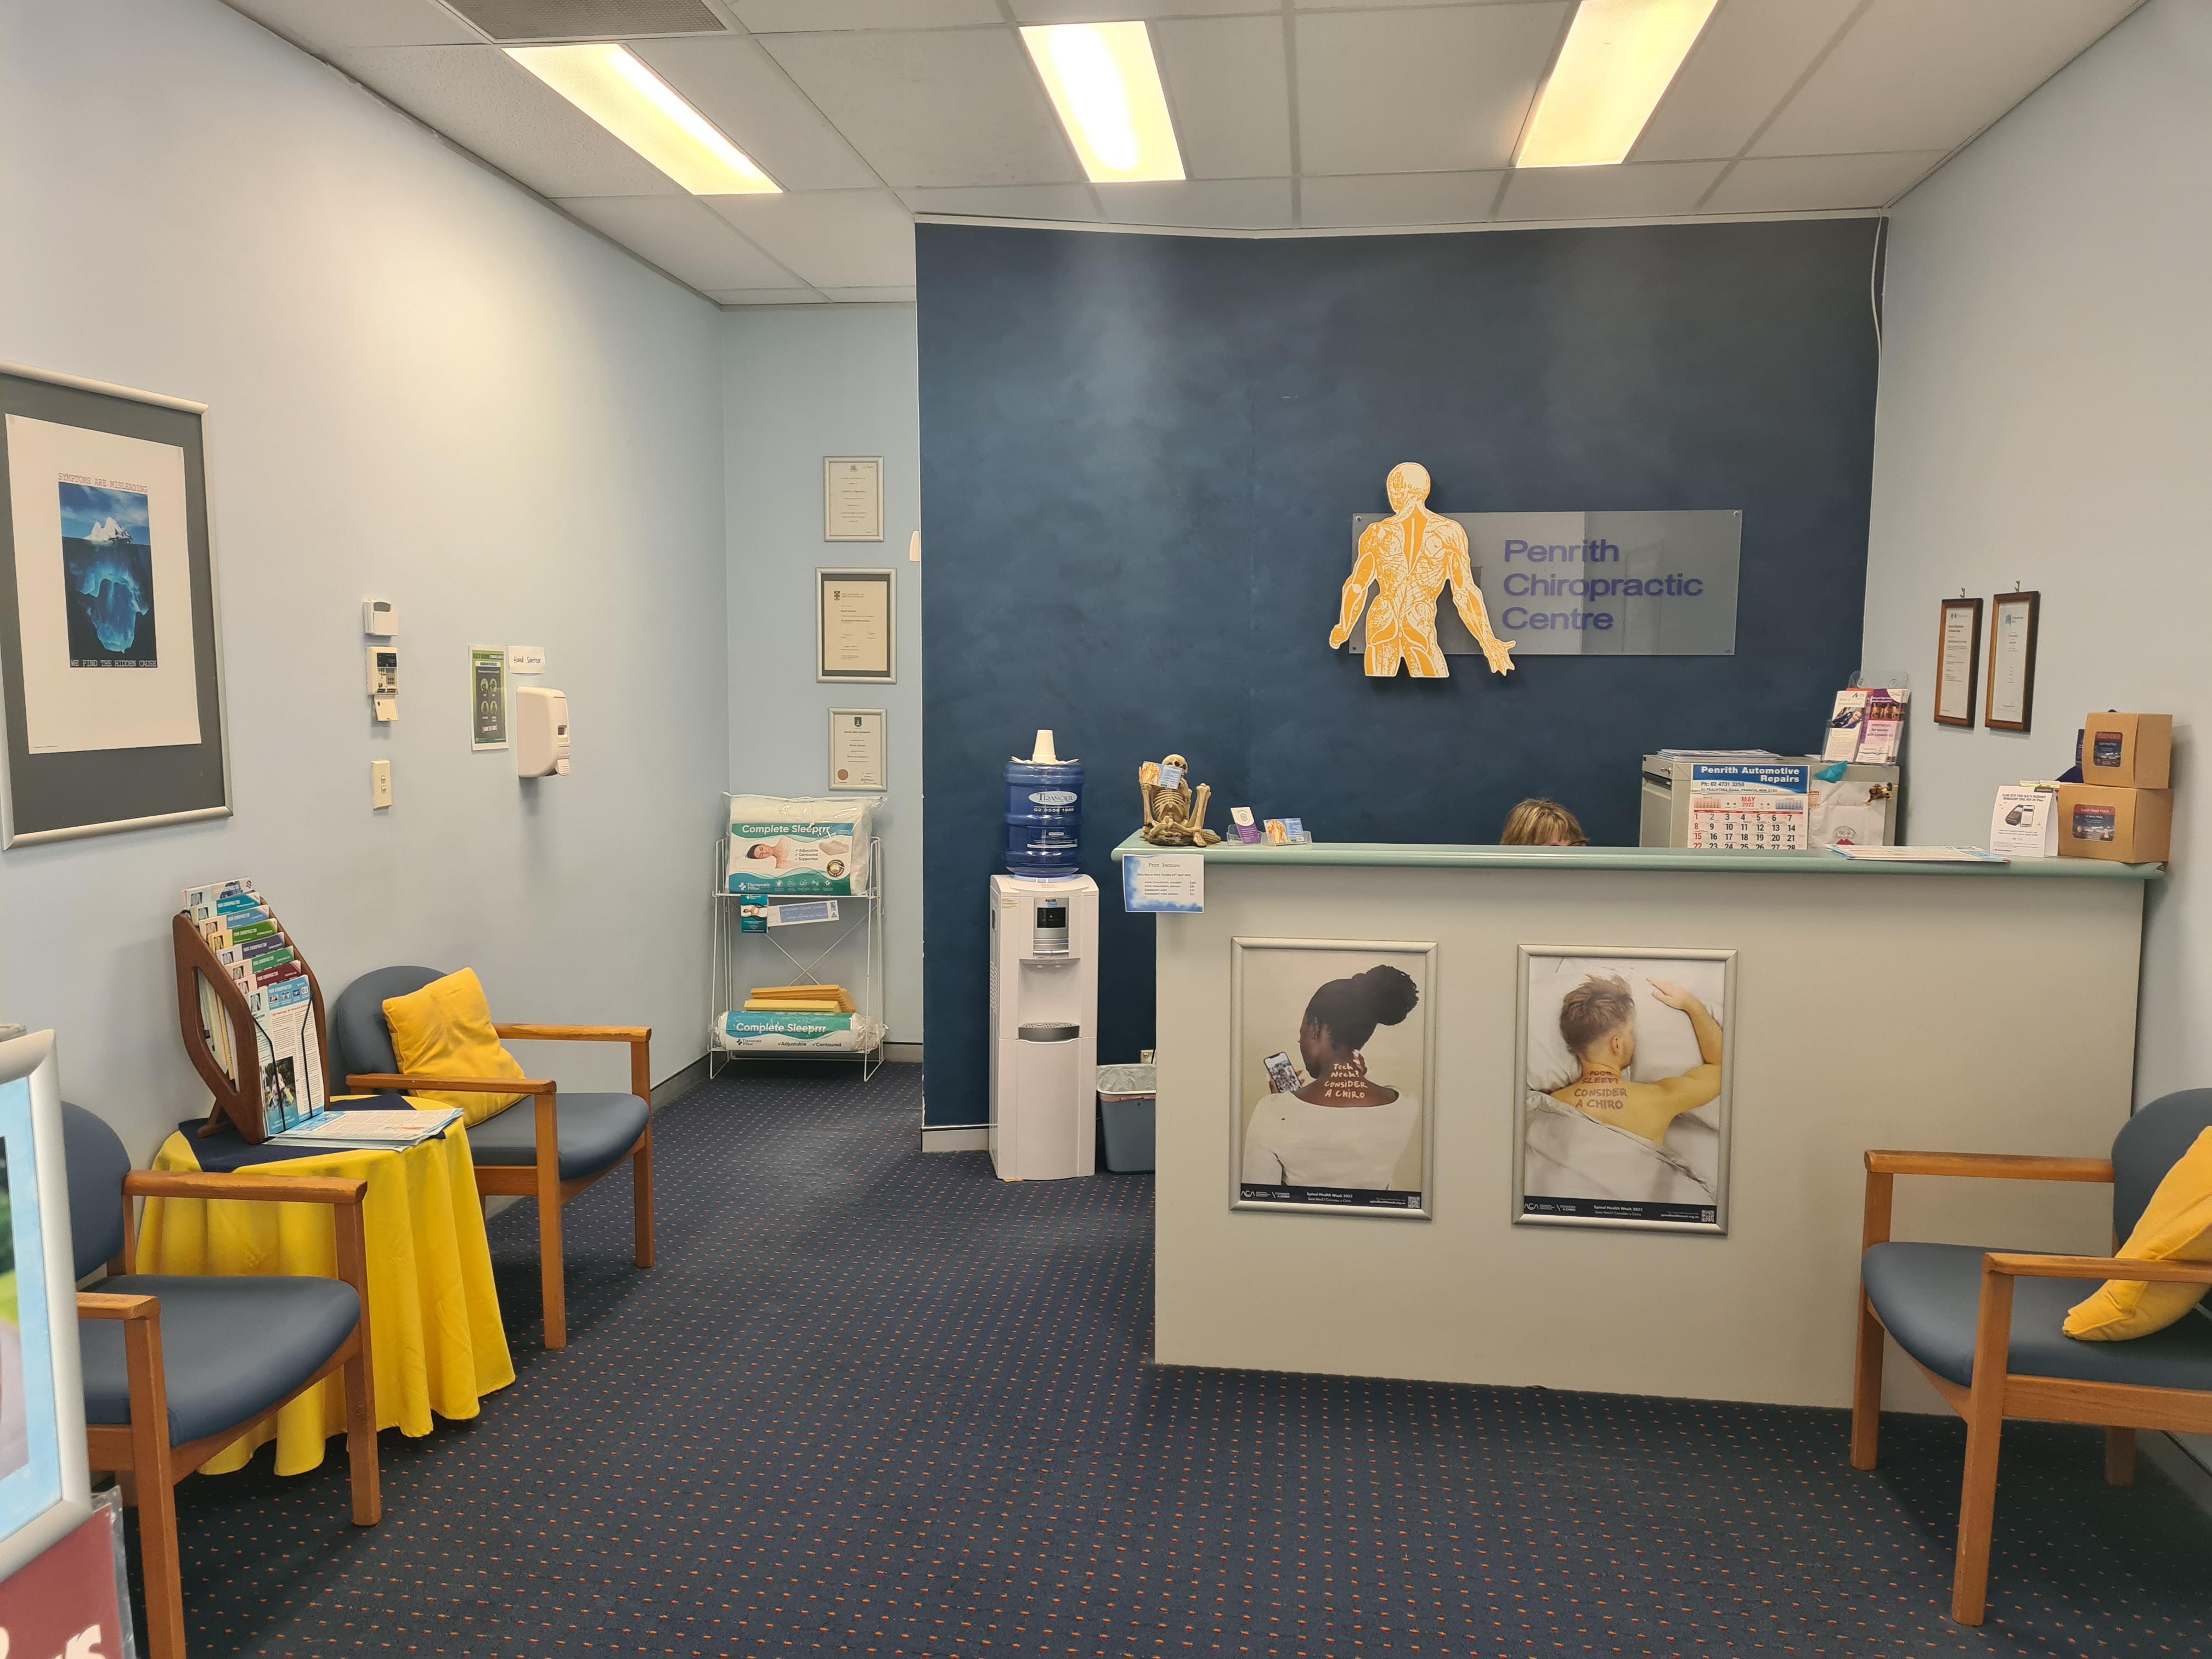 Images Penrith Chiropractic Centre